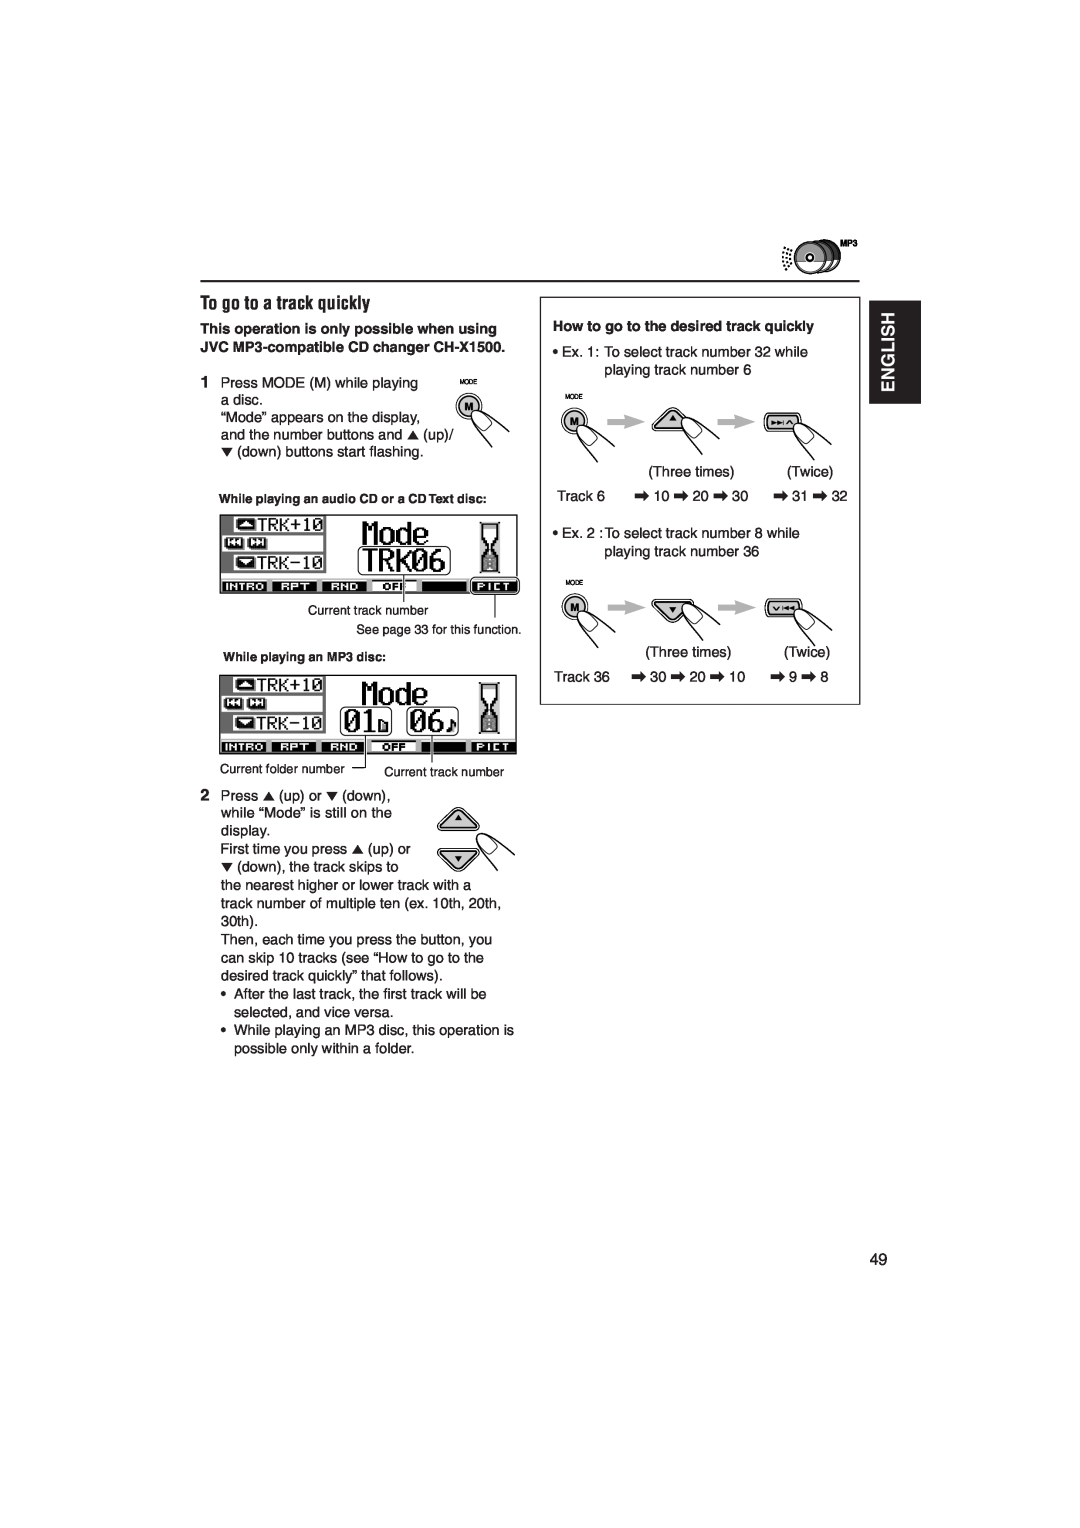 JVC KD-SH9105 manual To go to a track quickly, English, Press MODE M while playing, How to go to the desired track quickly 